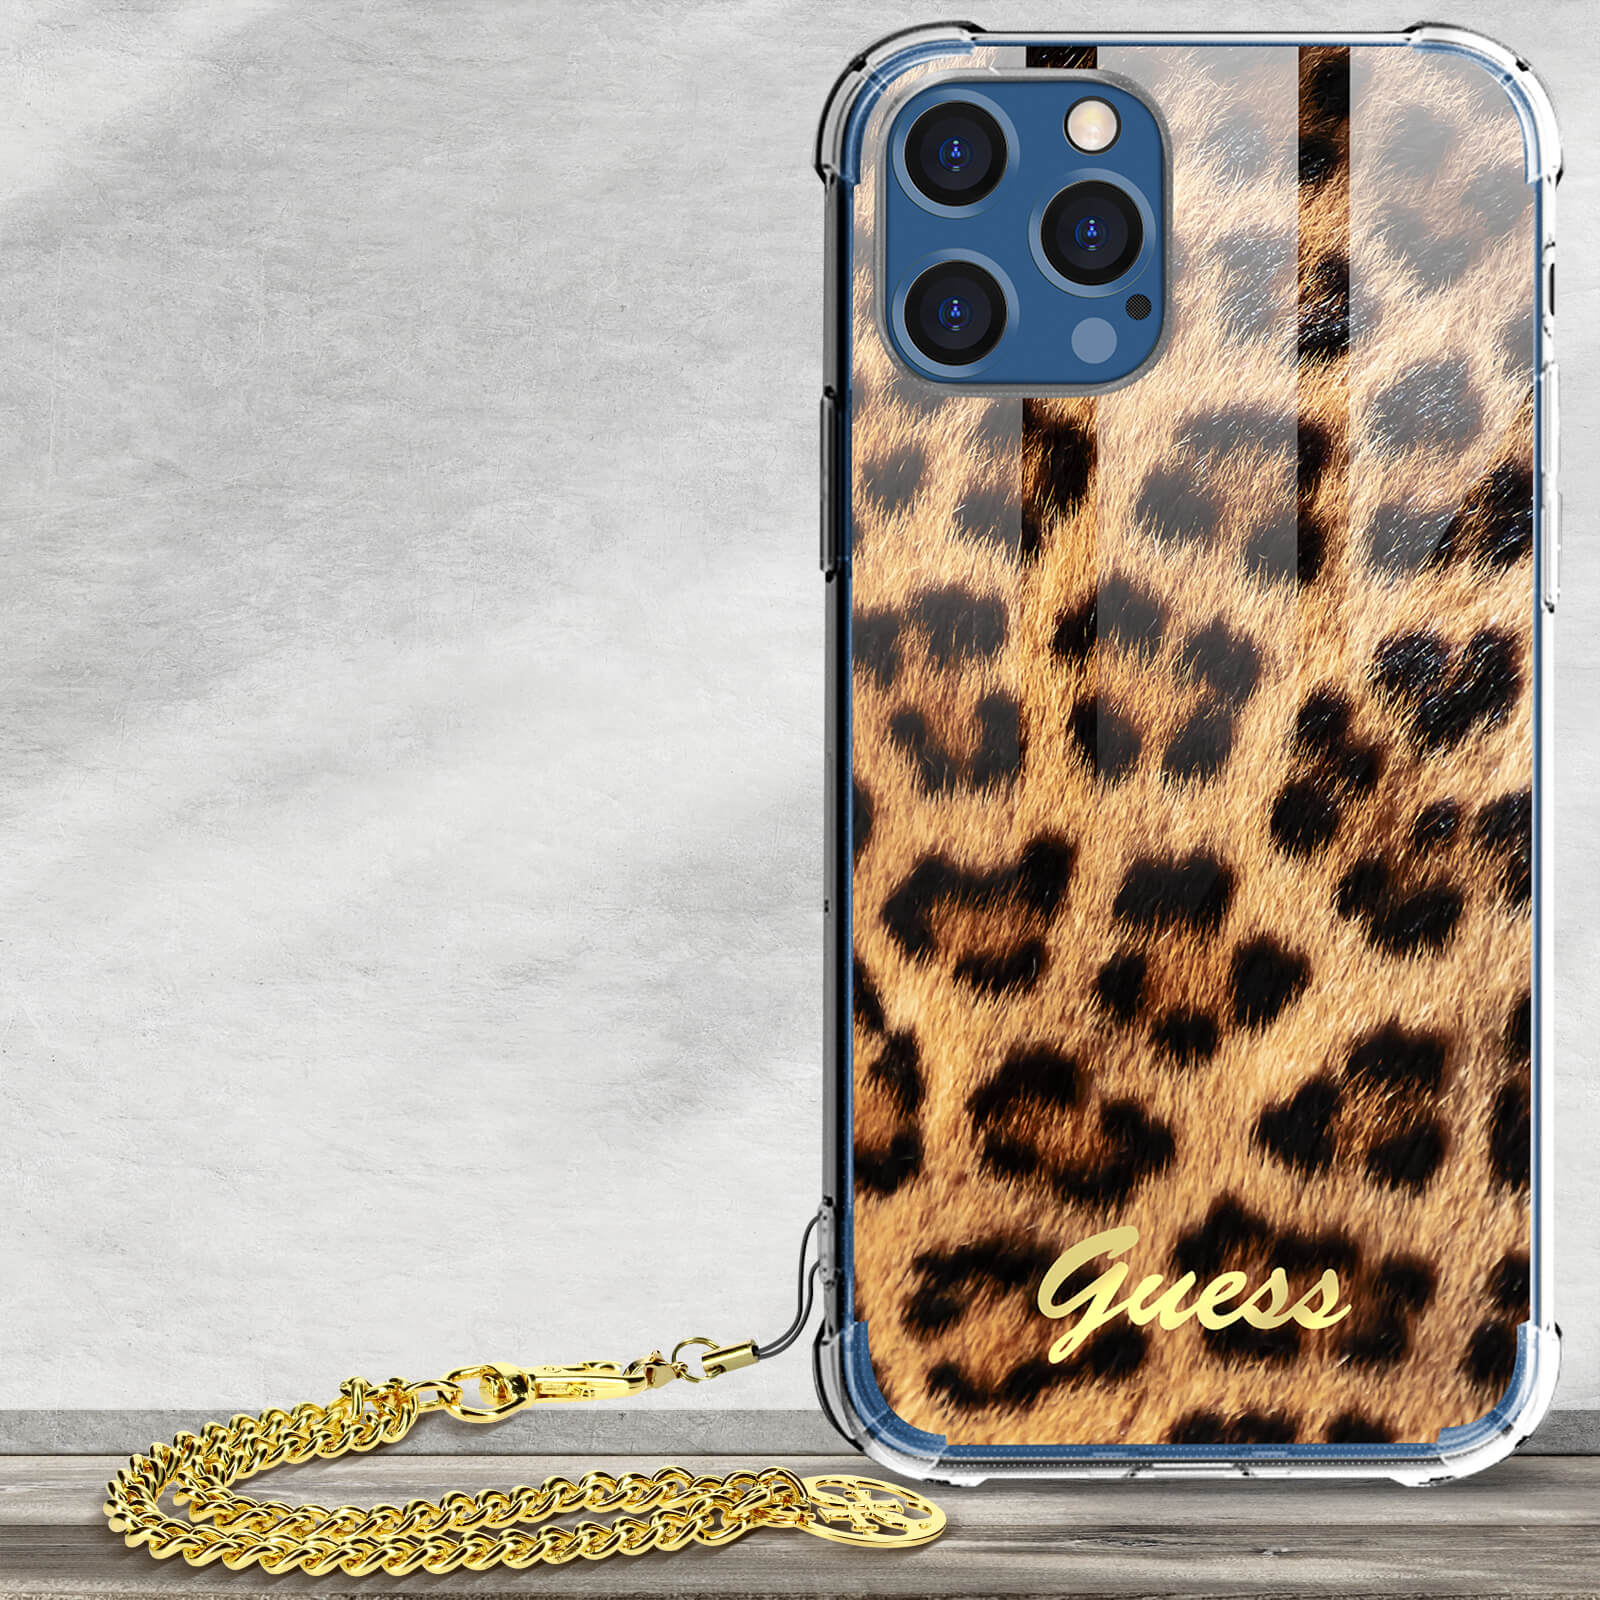 Max, Series, Leopard Pro Muster Apple, 12 iPhone Backcover, Orange GUESS